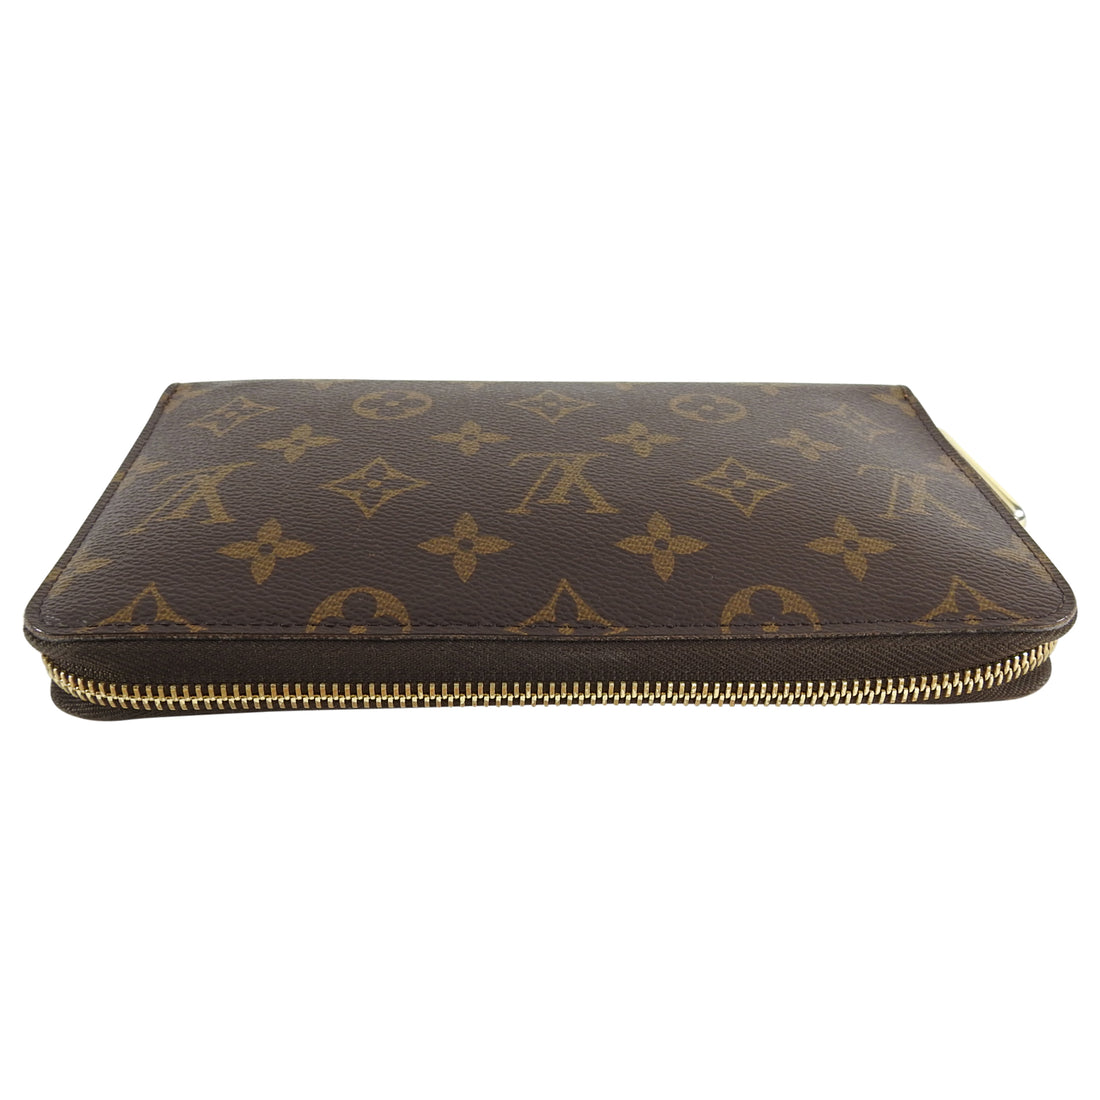 Limied Edition ! Louis Vuitton Monogram Canvas M60035 Green / White Groom  Zippy Organizer Wallet - The Attic Place